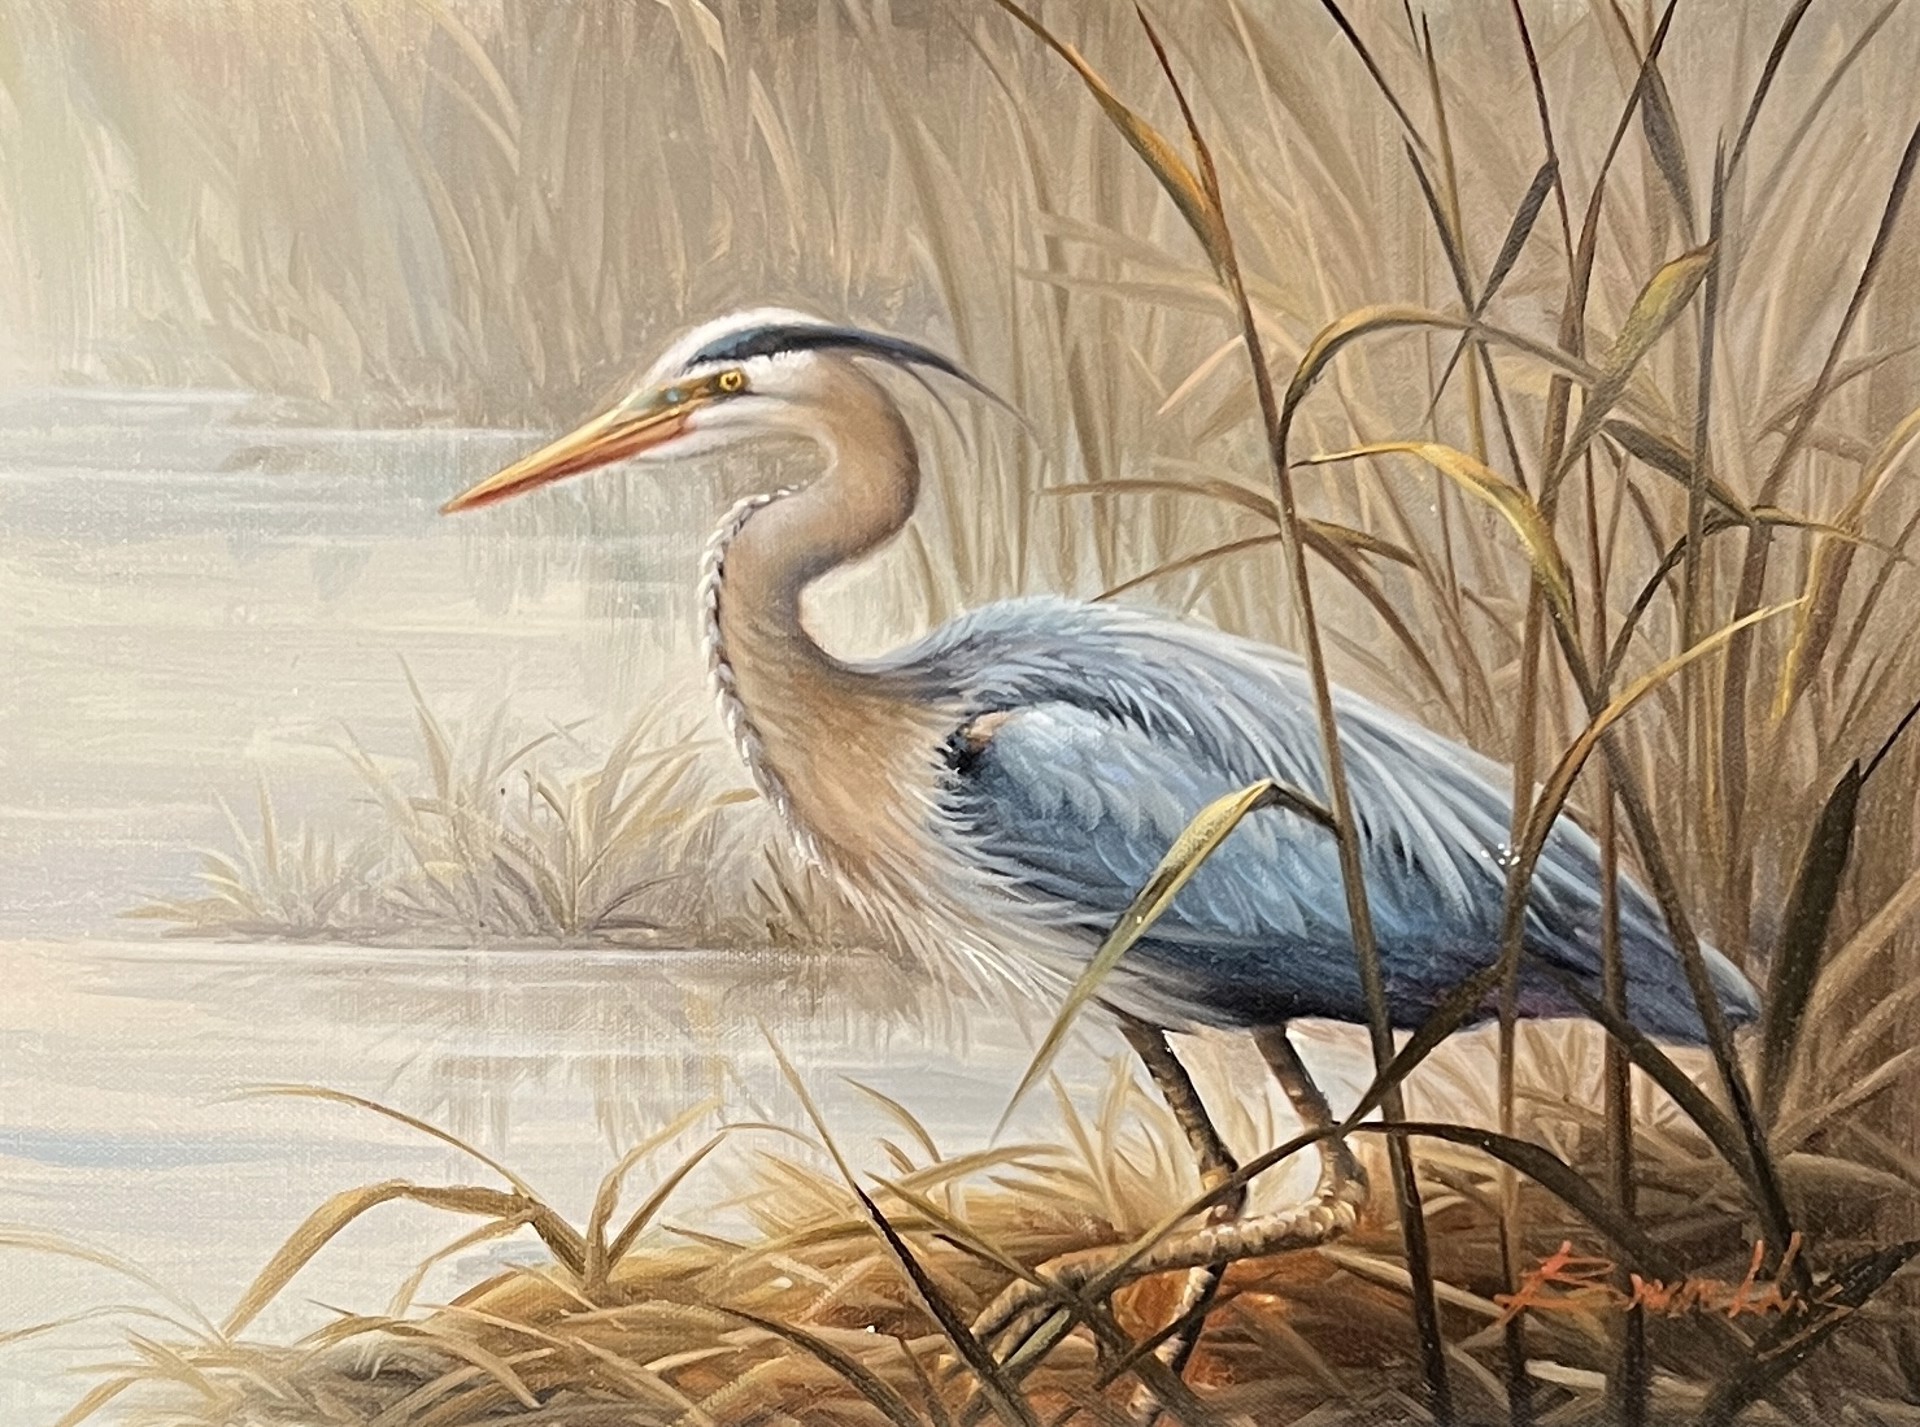 HERON BY WATER'S EDGE by BRUNELLY